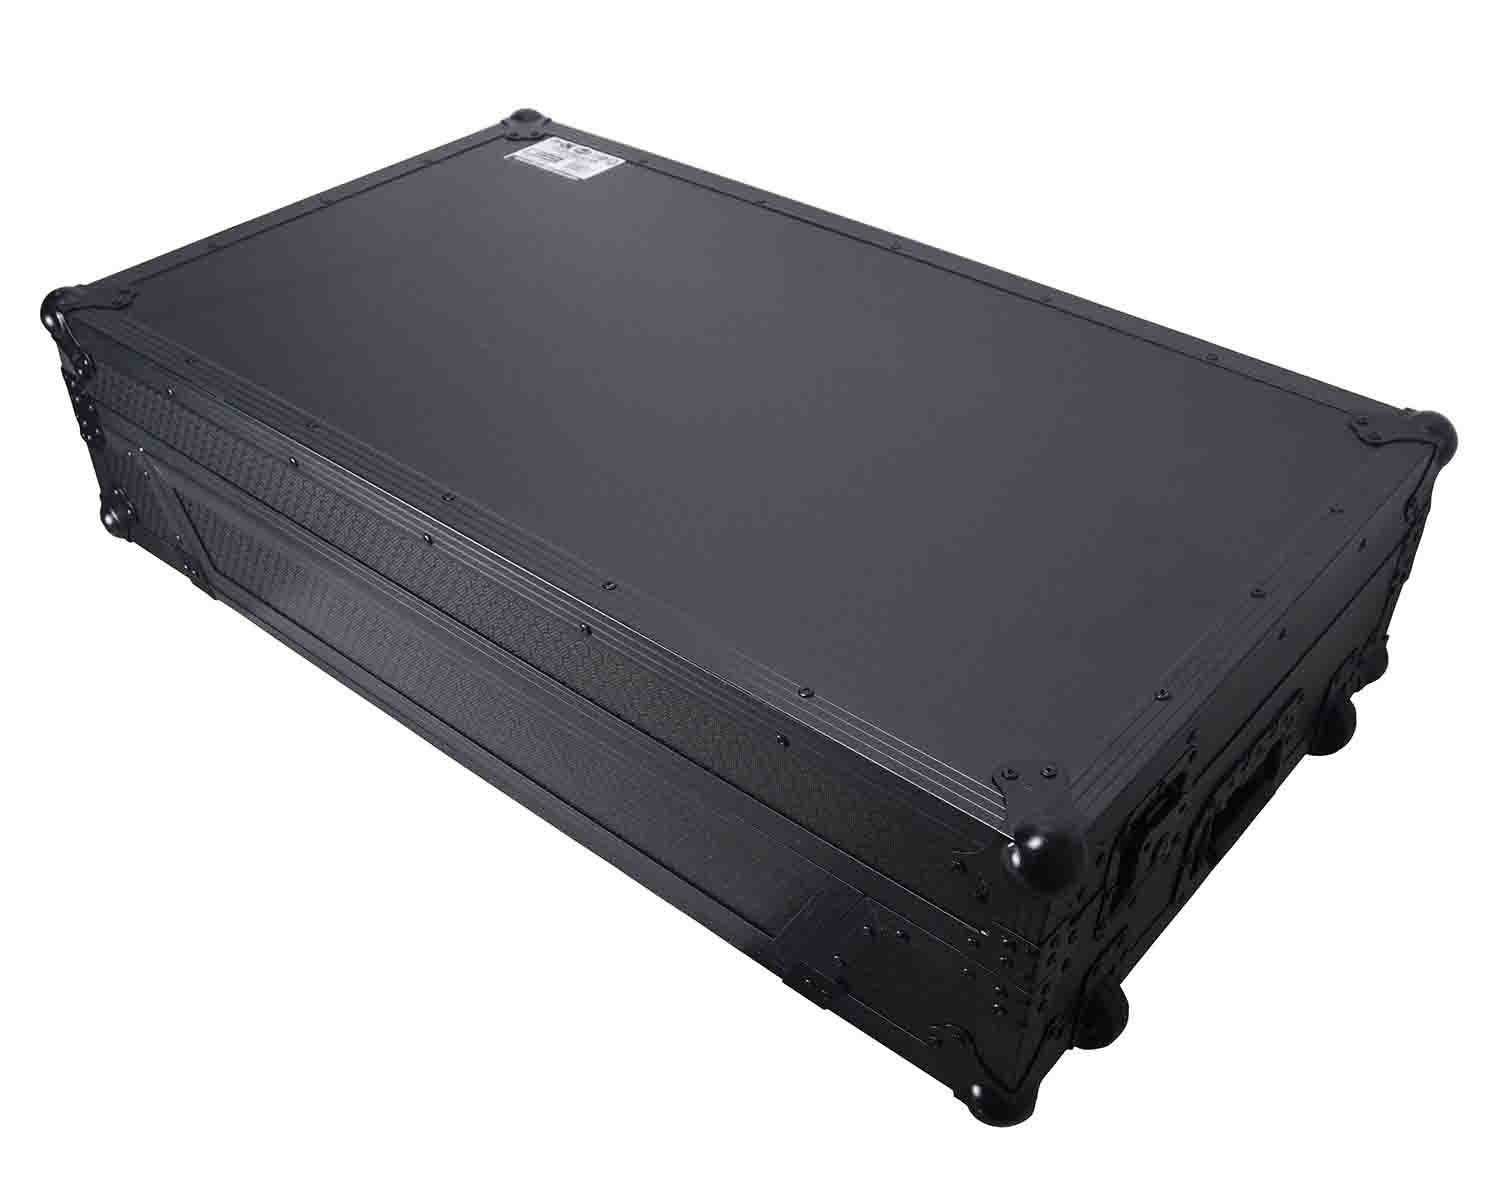 B-Stock: ProX XS-OPUSQUADWBL Flight Style Road Case for Pioneer Opus Quad DJ Controller with 1U Rack Space and Wheels - Black by ProX Live Performance Gear